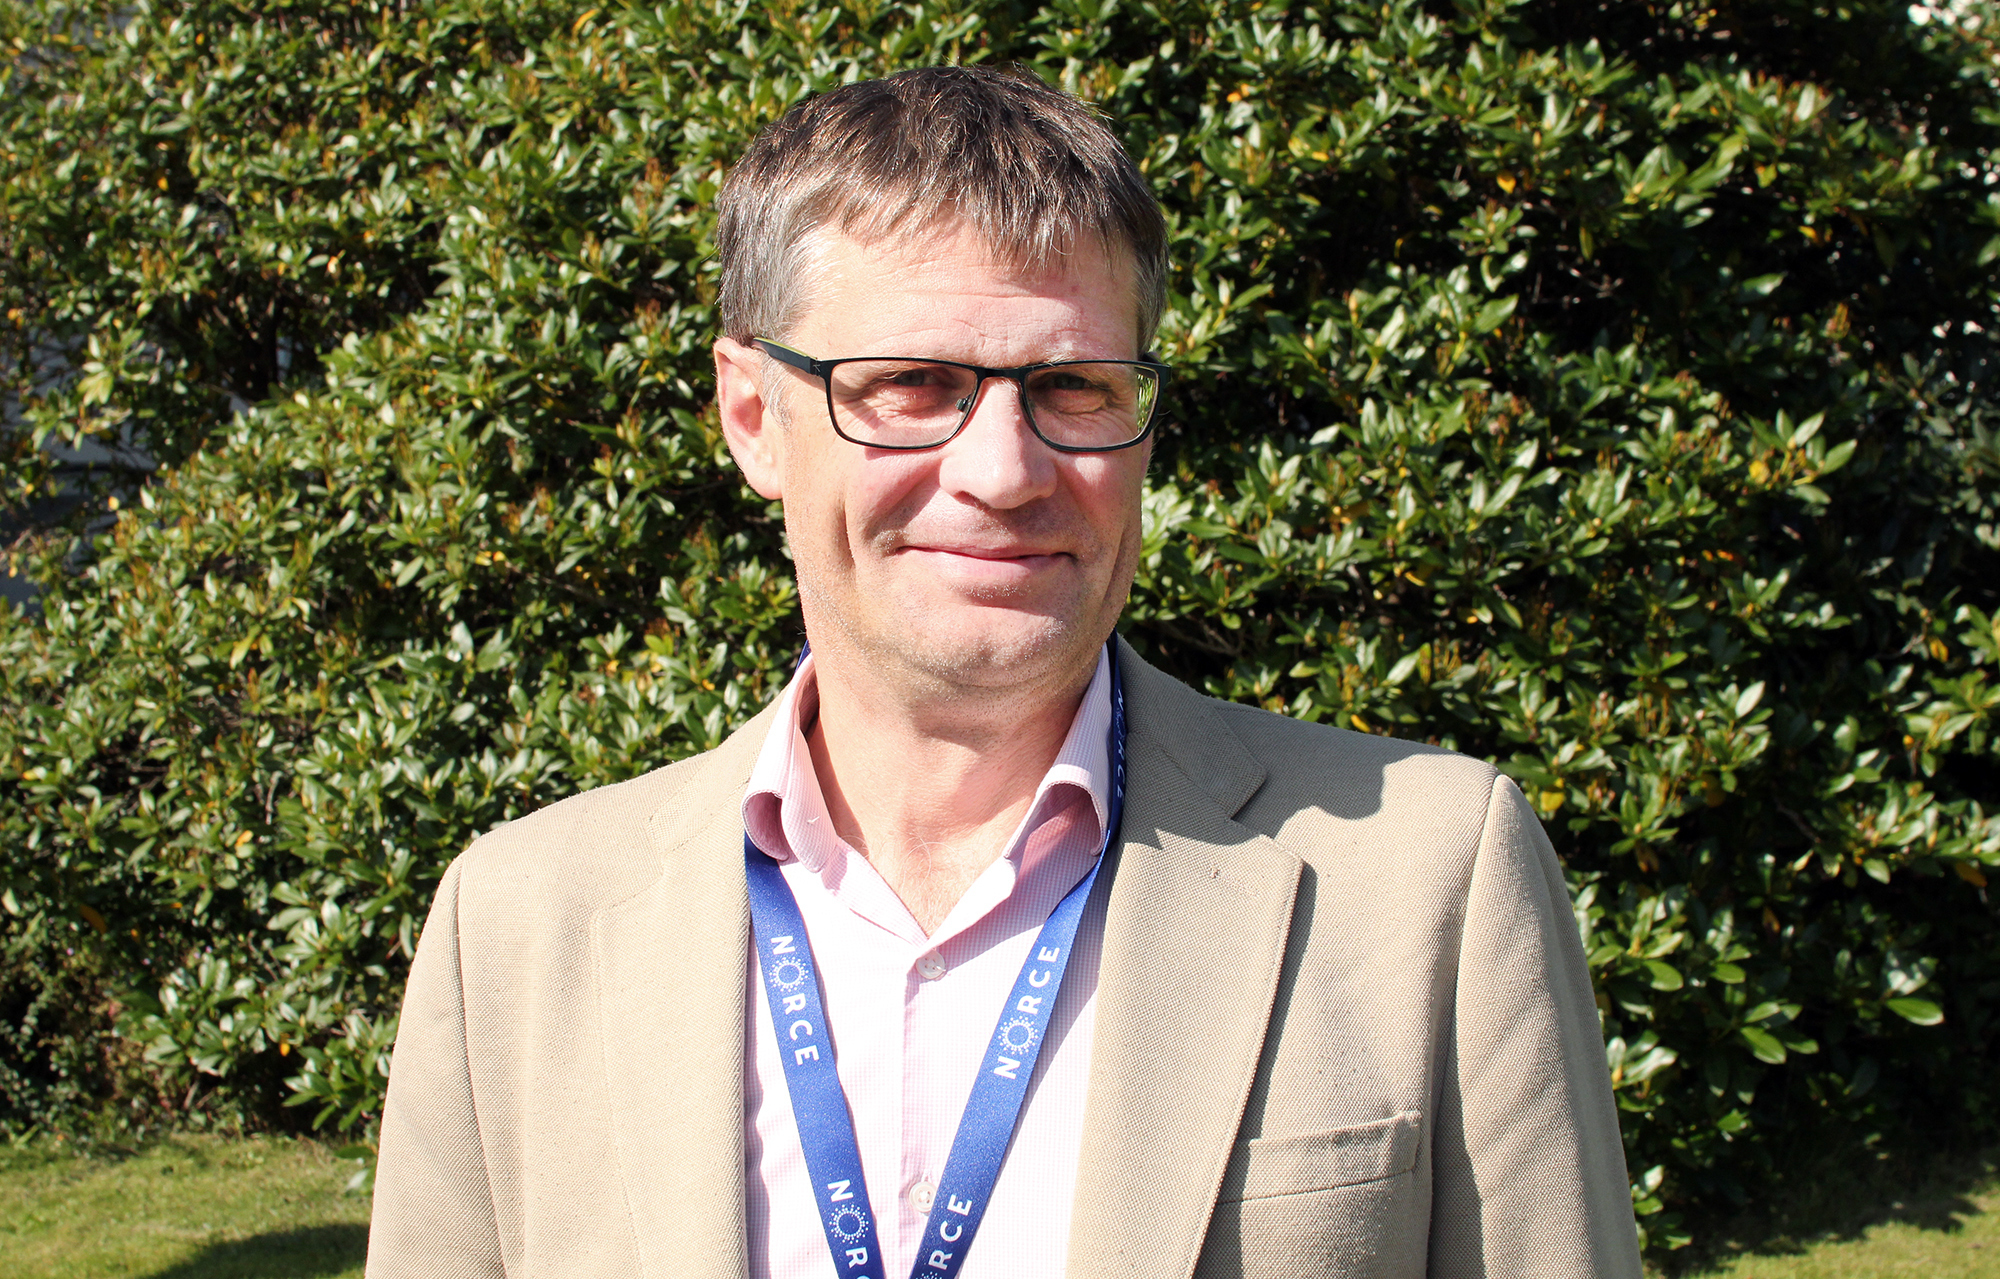 Richard Sanders, Researcher with NORCE and the Bjerknes Centre, and OTC director. (Photo: Andreas Hadsel Opsvik)